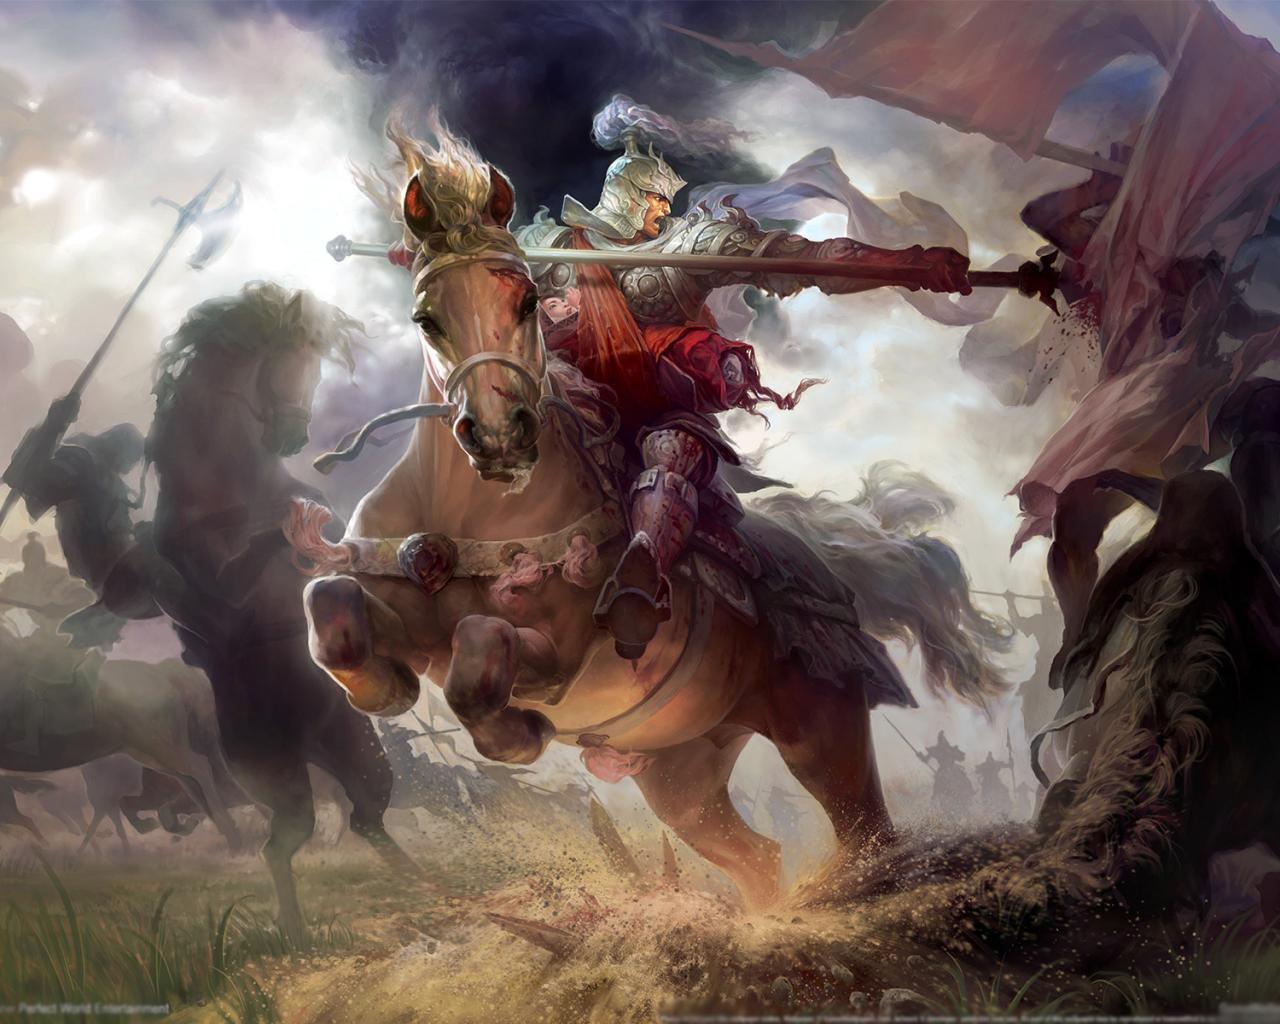 20812 download wallpaper men, people, fantasy, horses, war screensavers and pictures for free